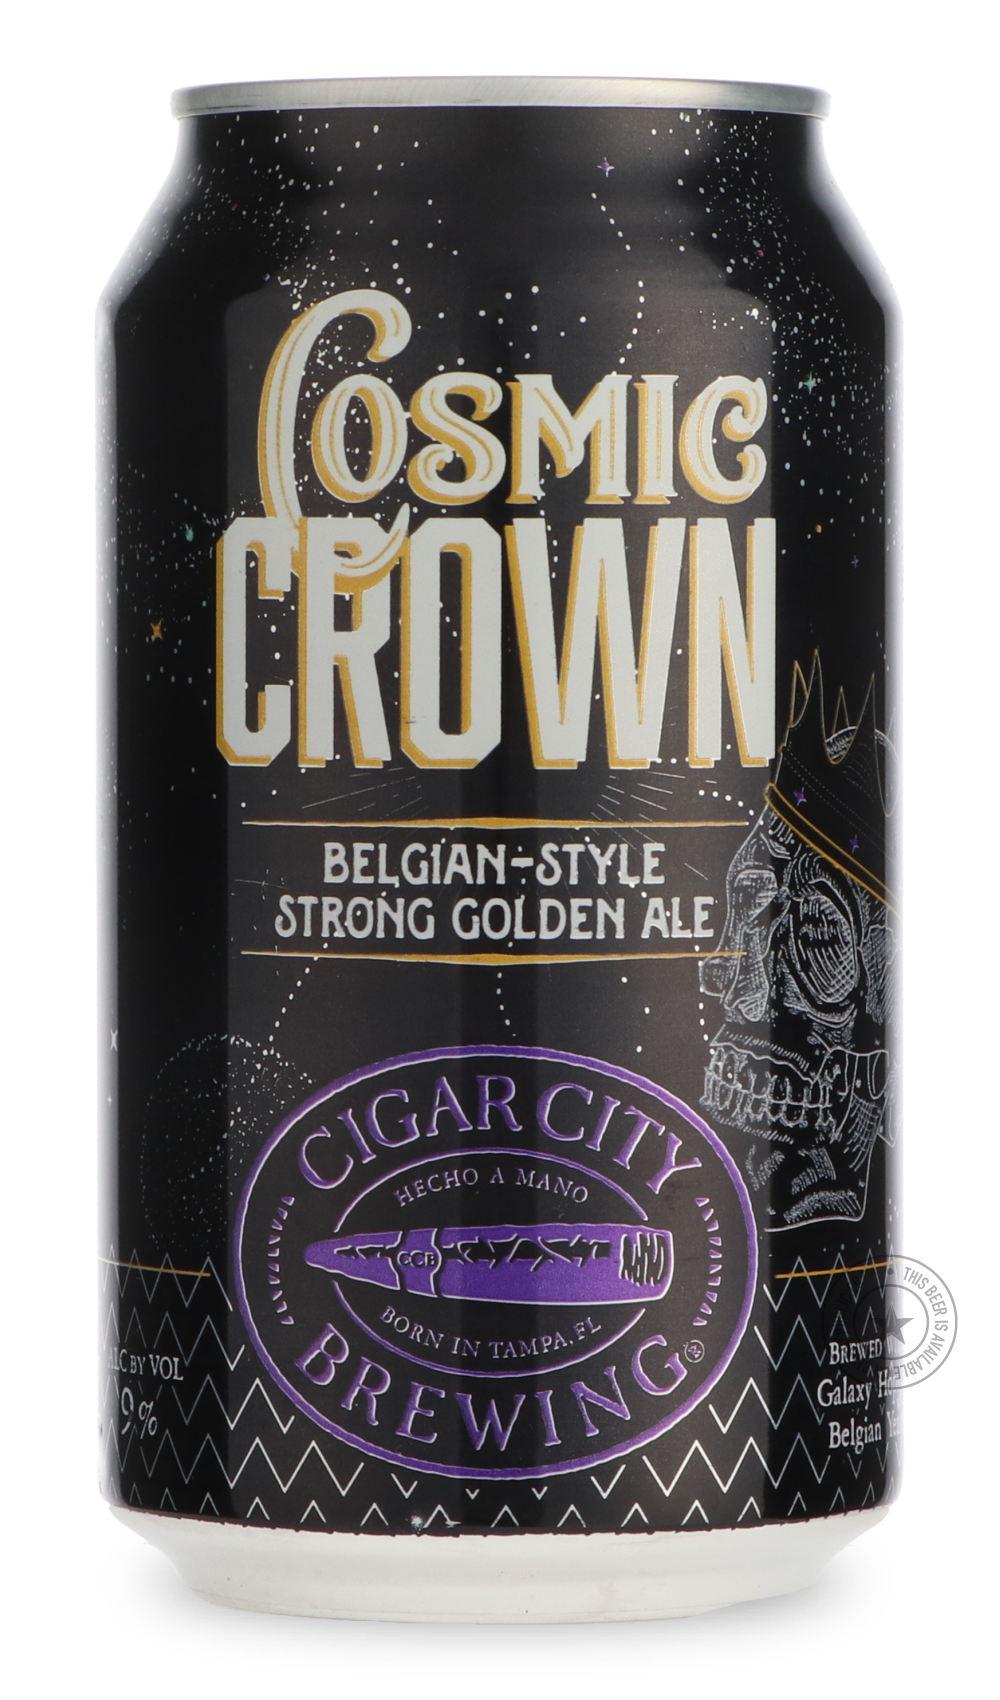 -Cigar City- Cosmic Crown-Pale- Only @ Beer Republic - The best online beer store for American & Canadian craft beer - Buy beer online from the USA and Canada - Bier online kopen - Amerikaans bier kopen - Craft beer store - Craft beer kopen - Amerikanisch bier kaufen - Bier online kaufen - Acheter biere online - IPA - Stout - Porter - New England IPA - Hazy IPA - Imperial Stout - Barrel Aged - Barrel Aged Imperial Stout - Brown - Dark beer - Blond - Blonde - Pilsner - Lager - Wheat - Weizen - Amber - Barley